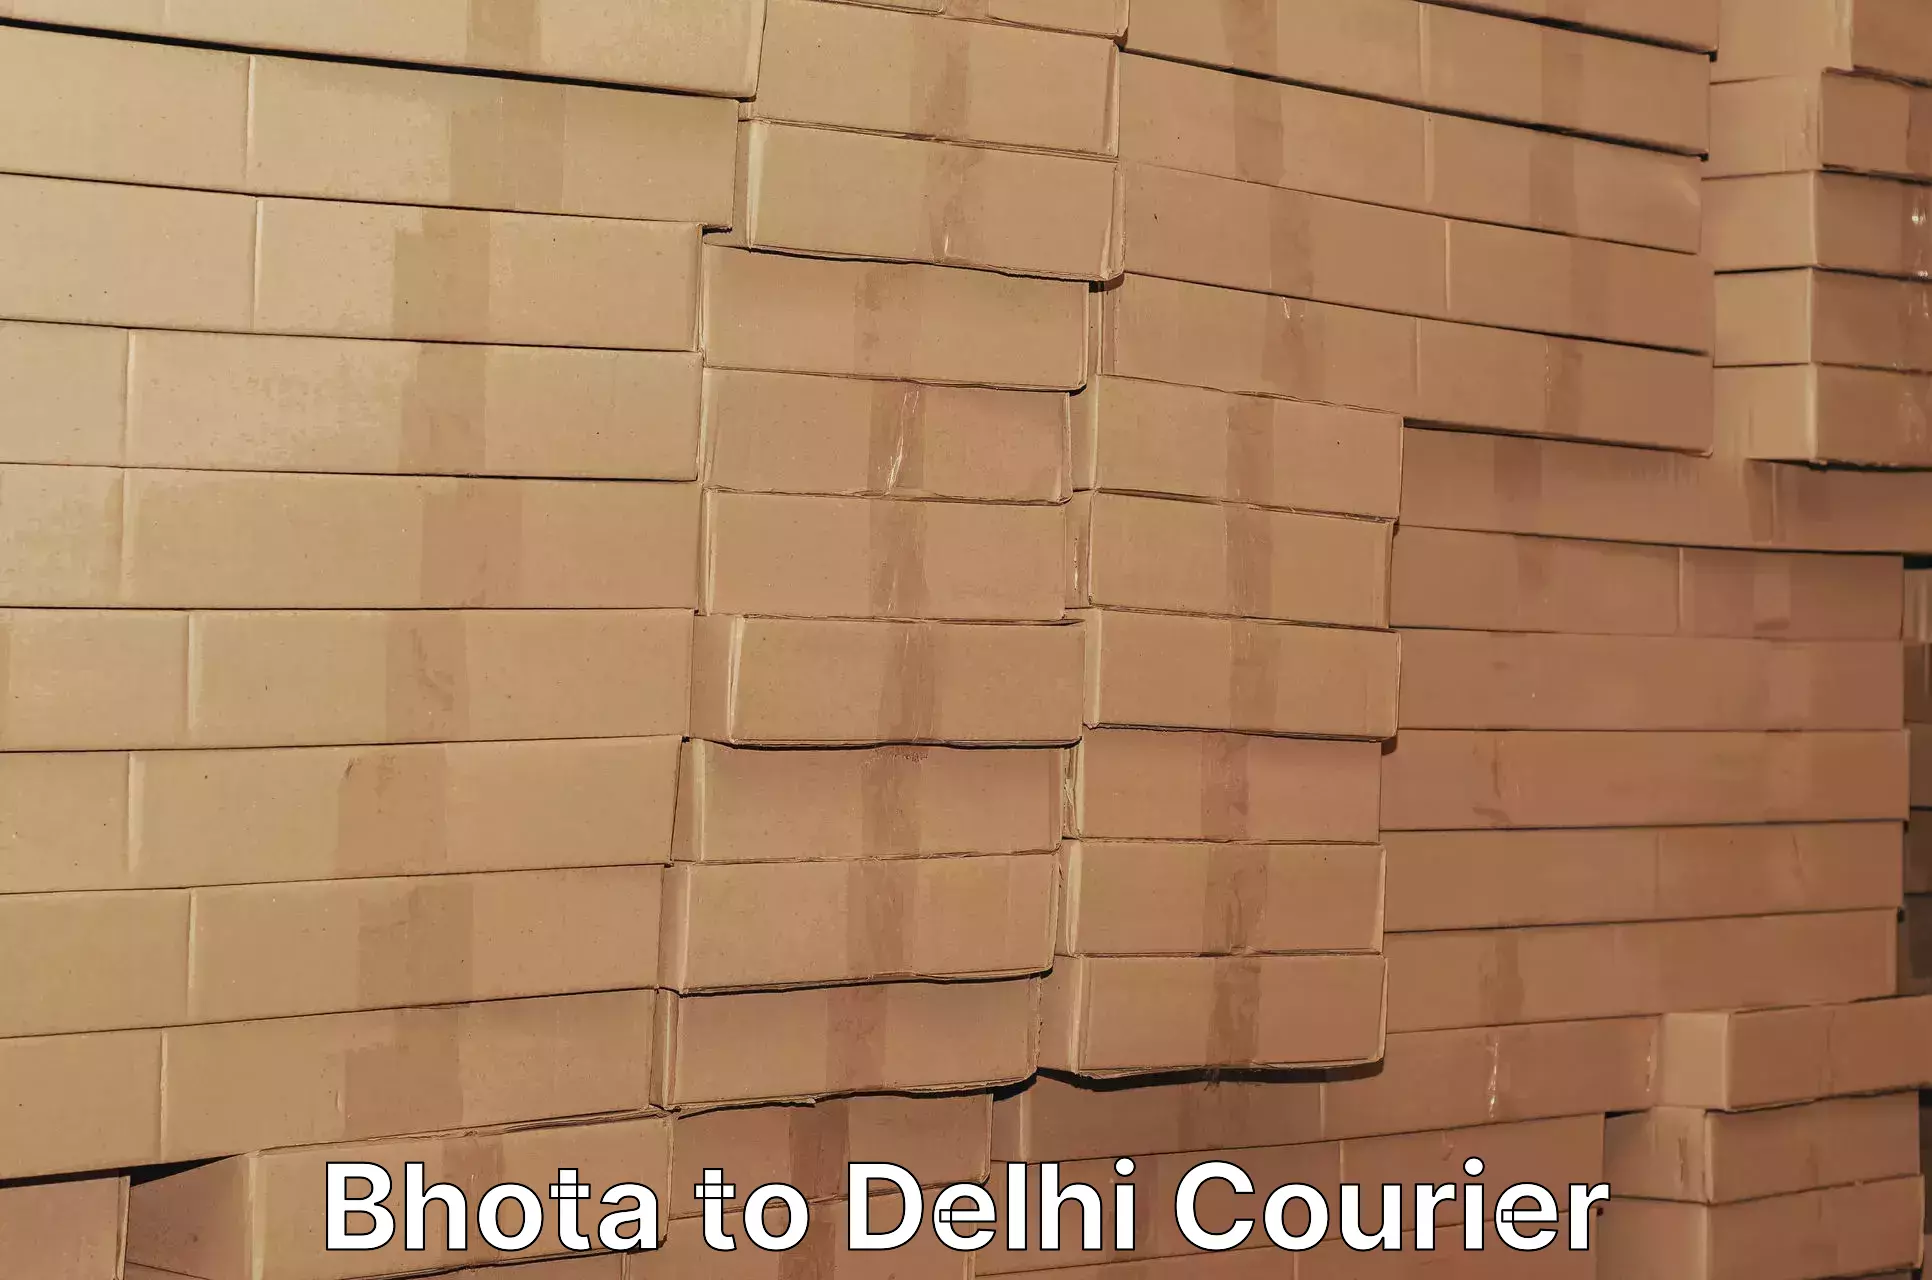 Cargo delivery service Bhota to NCR